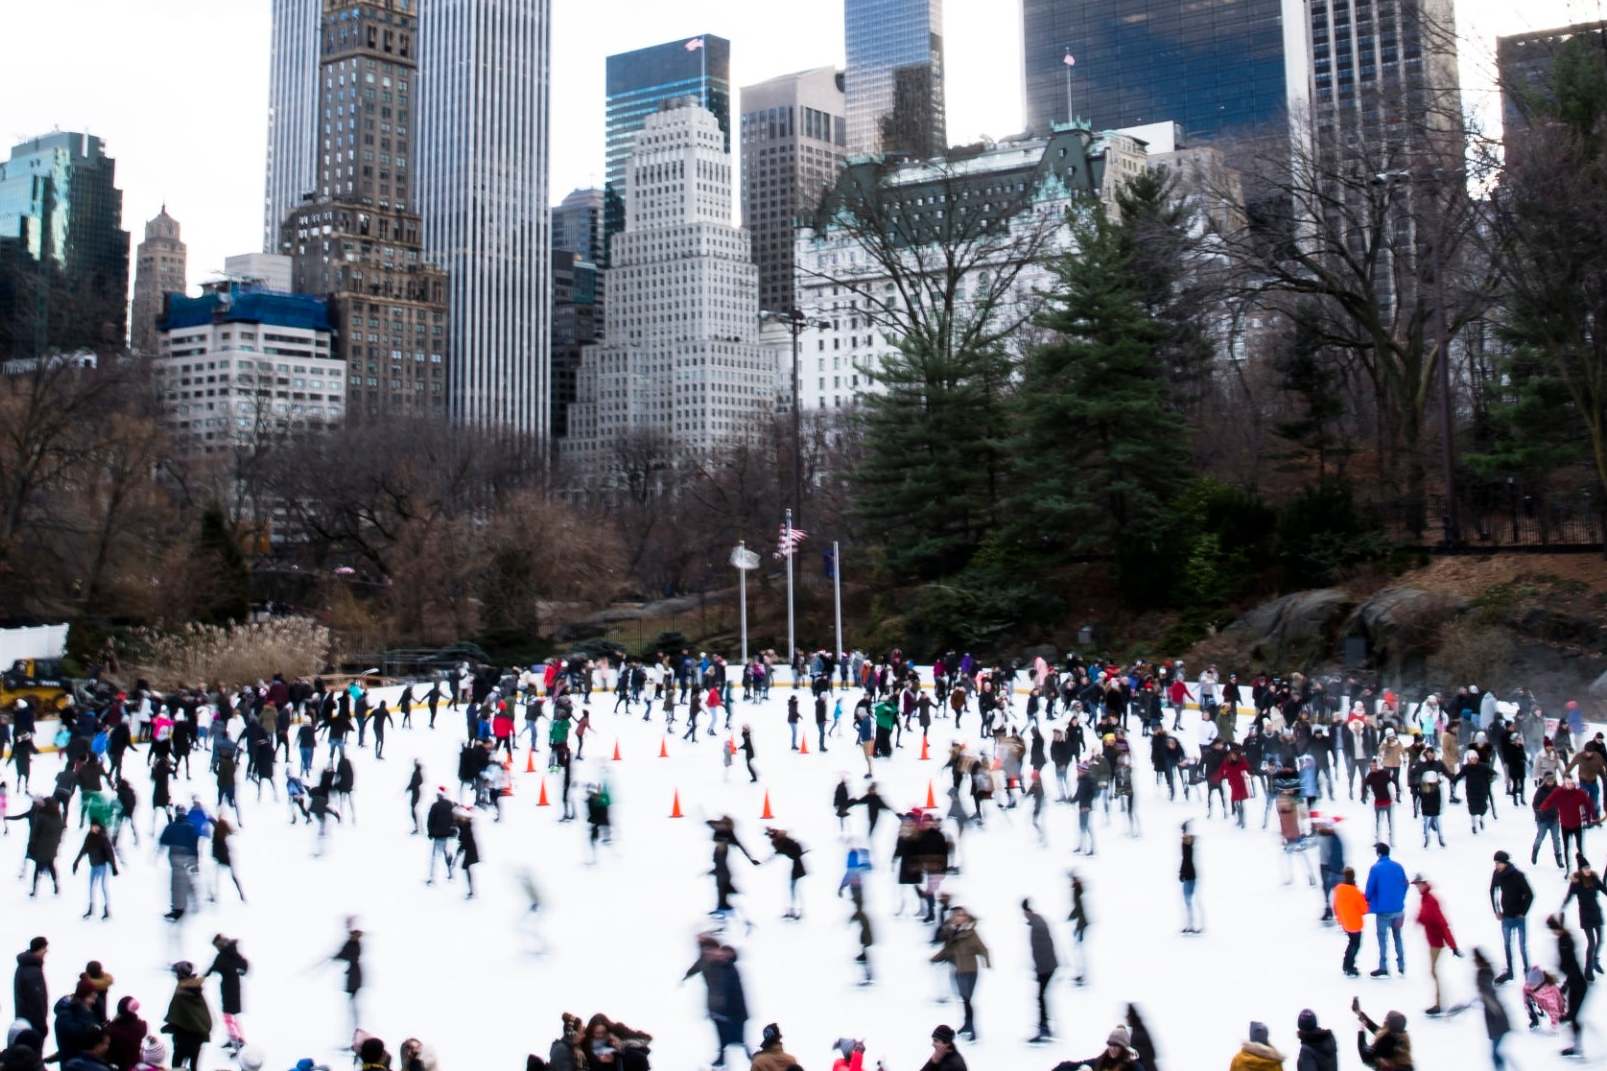 Why the Central Park ice rink is playing down its Trump associations